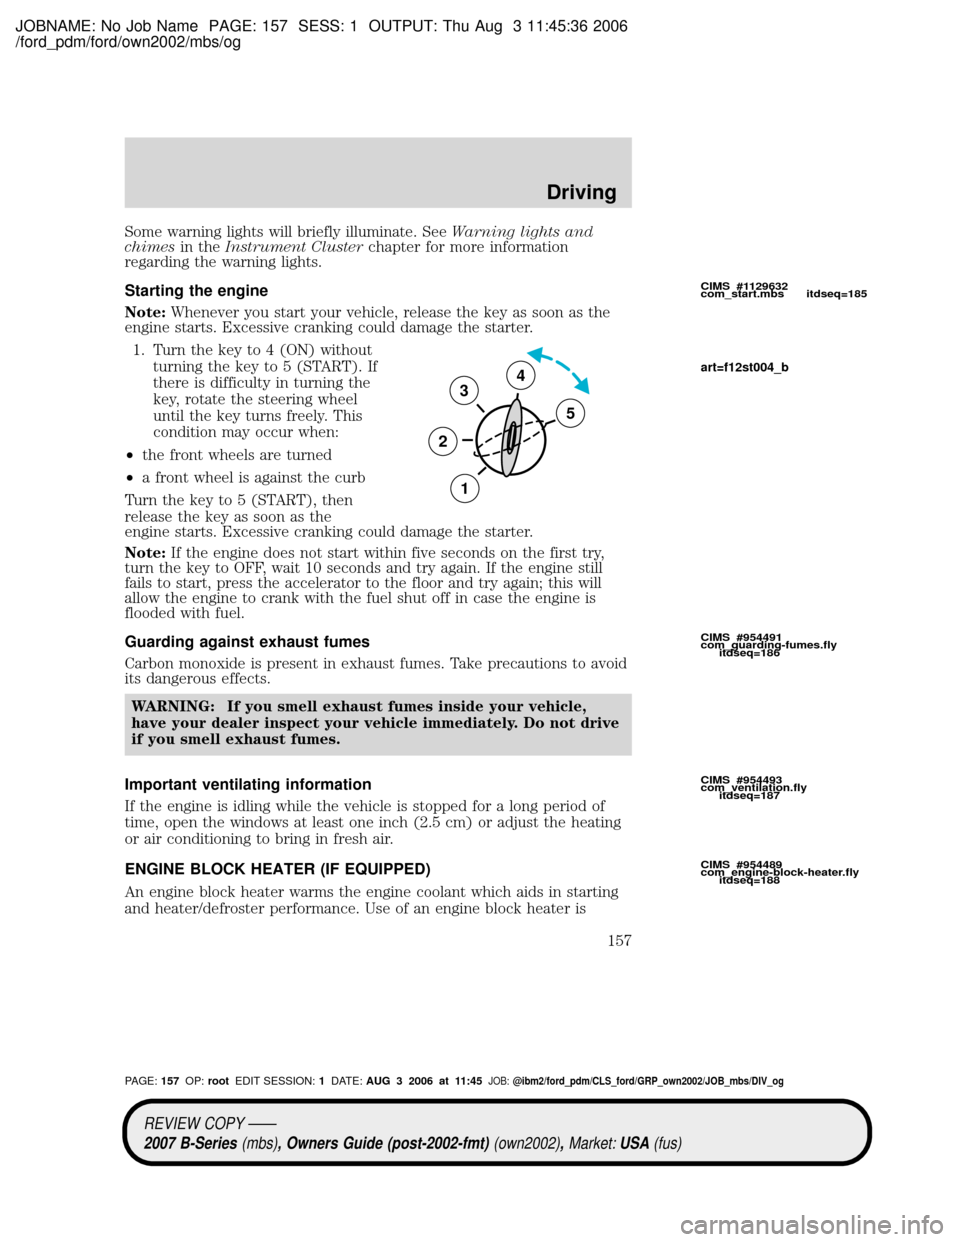 MAZDA MODEL B2300 TRUCK 2007  Owners Manual (in English) JOBNAME: No Job Name PAGE: 157 SESS: 1 OUTPUT: Thu Aug 3 11:45:36 2006
/ford_pdm/ford/own2002/mbs/og
Some warning lights will briefly illuminate. SeeWarning lights and
chimesin theInstrument Clusterch